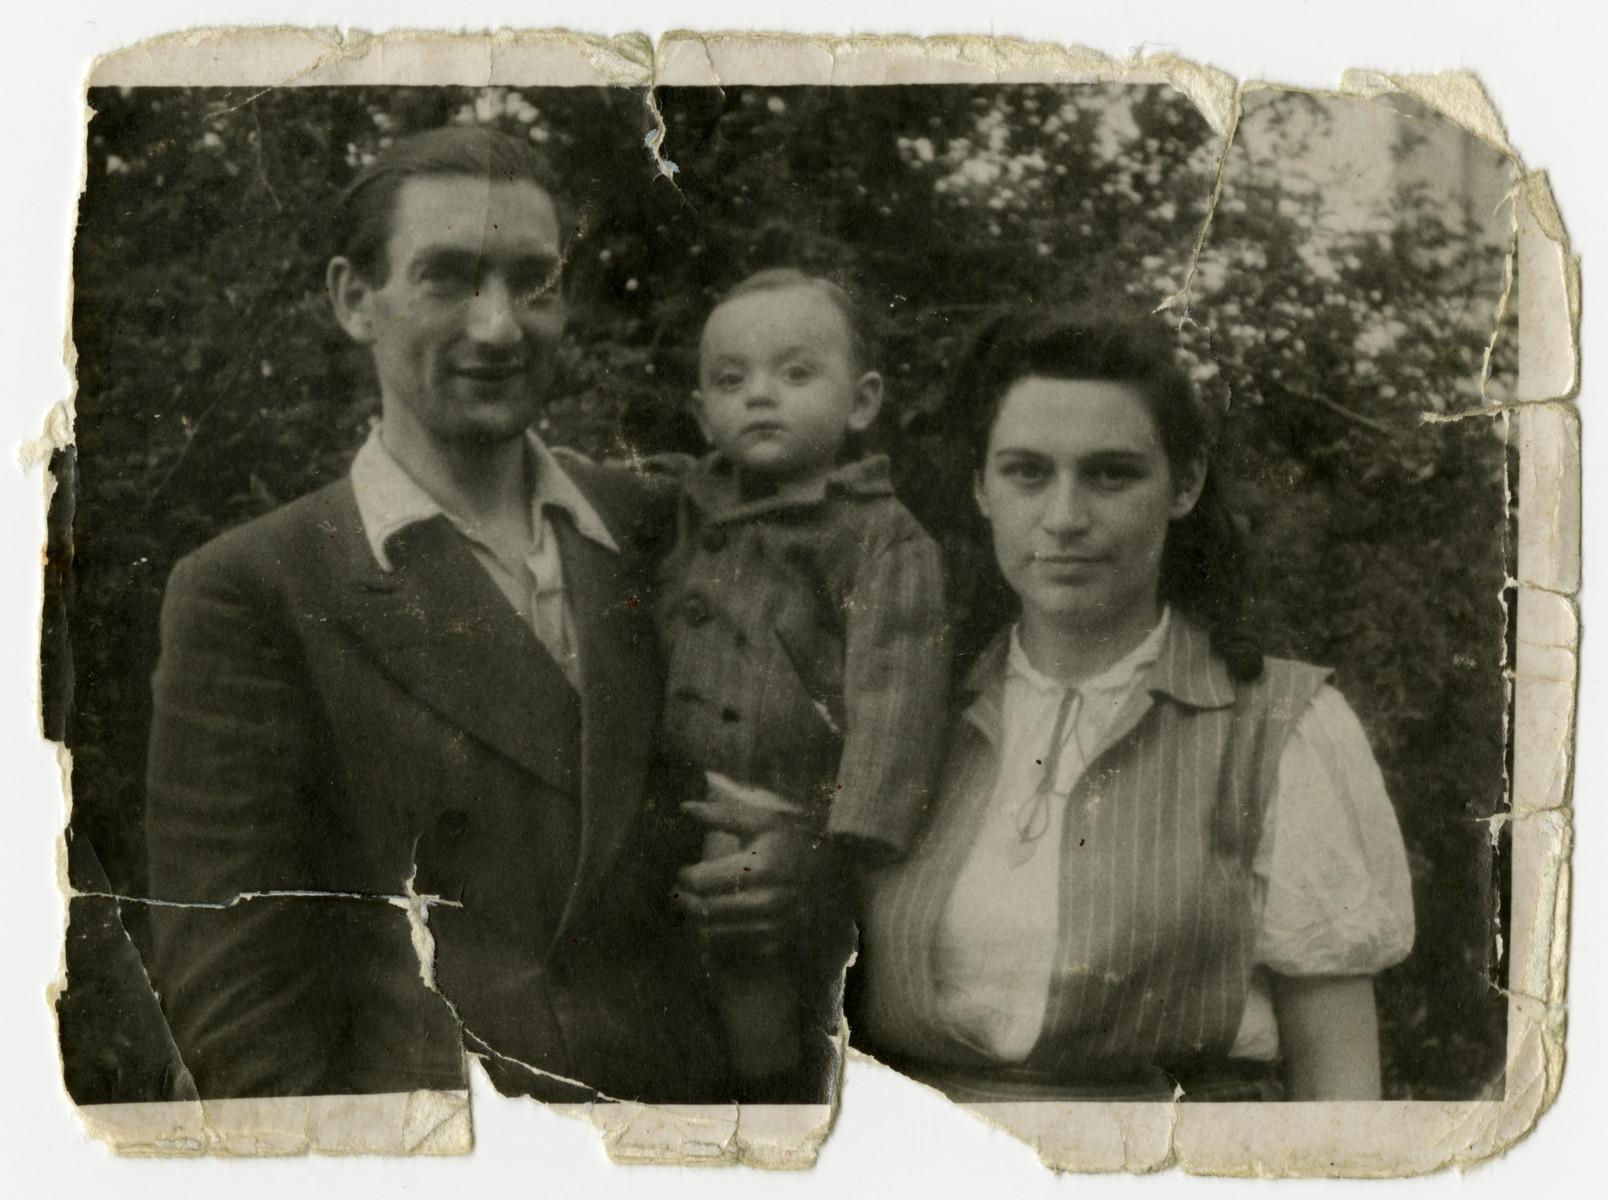 Close-up portrait of the Raysman family after returning from the Soviet Union.

From left to right are Motel, Marusia and Hershel Raysman.